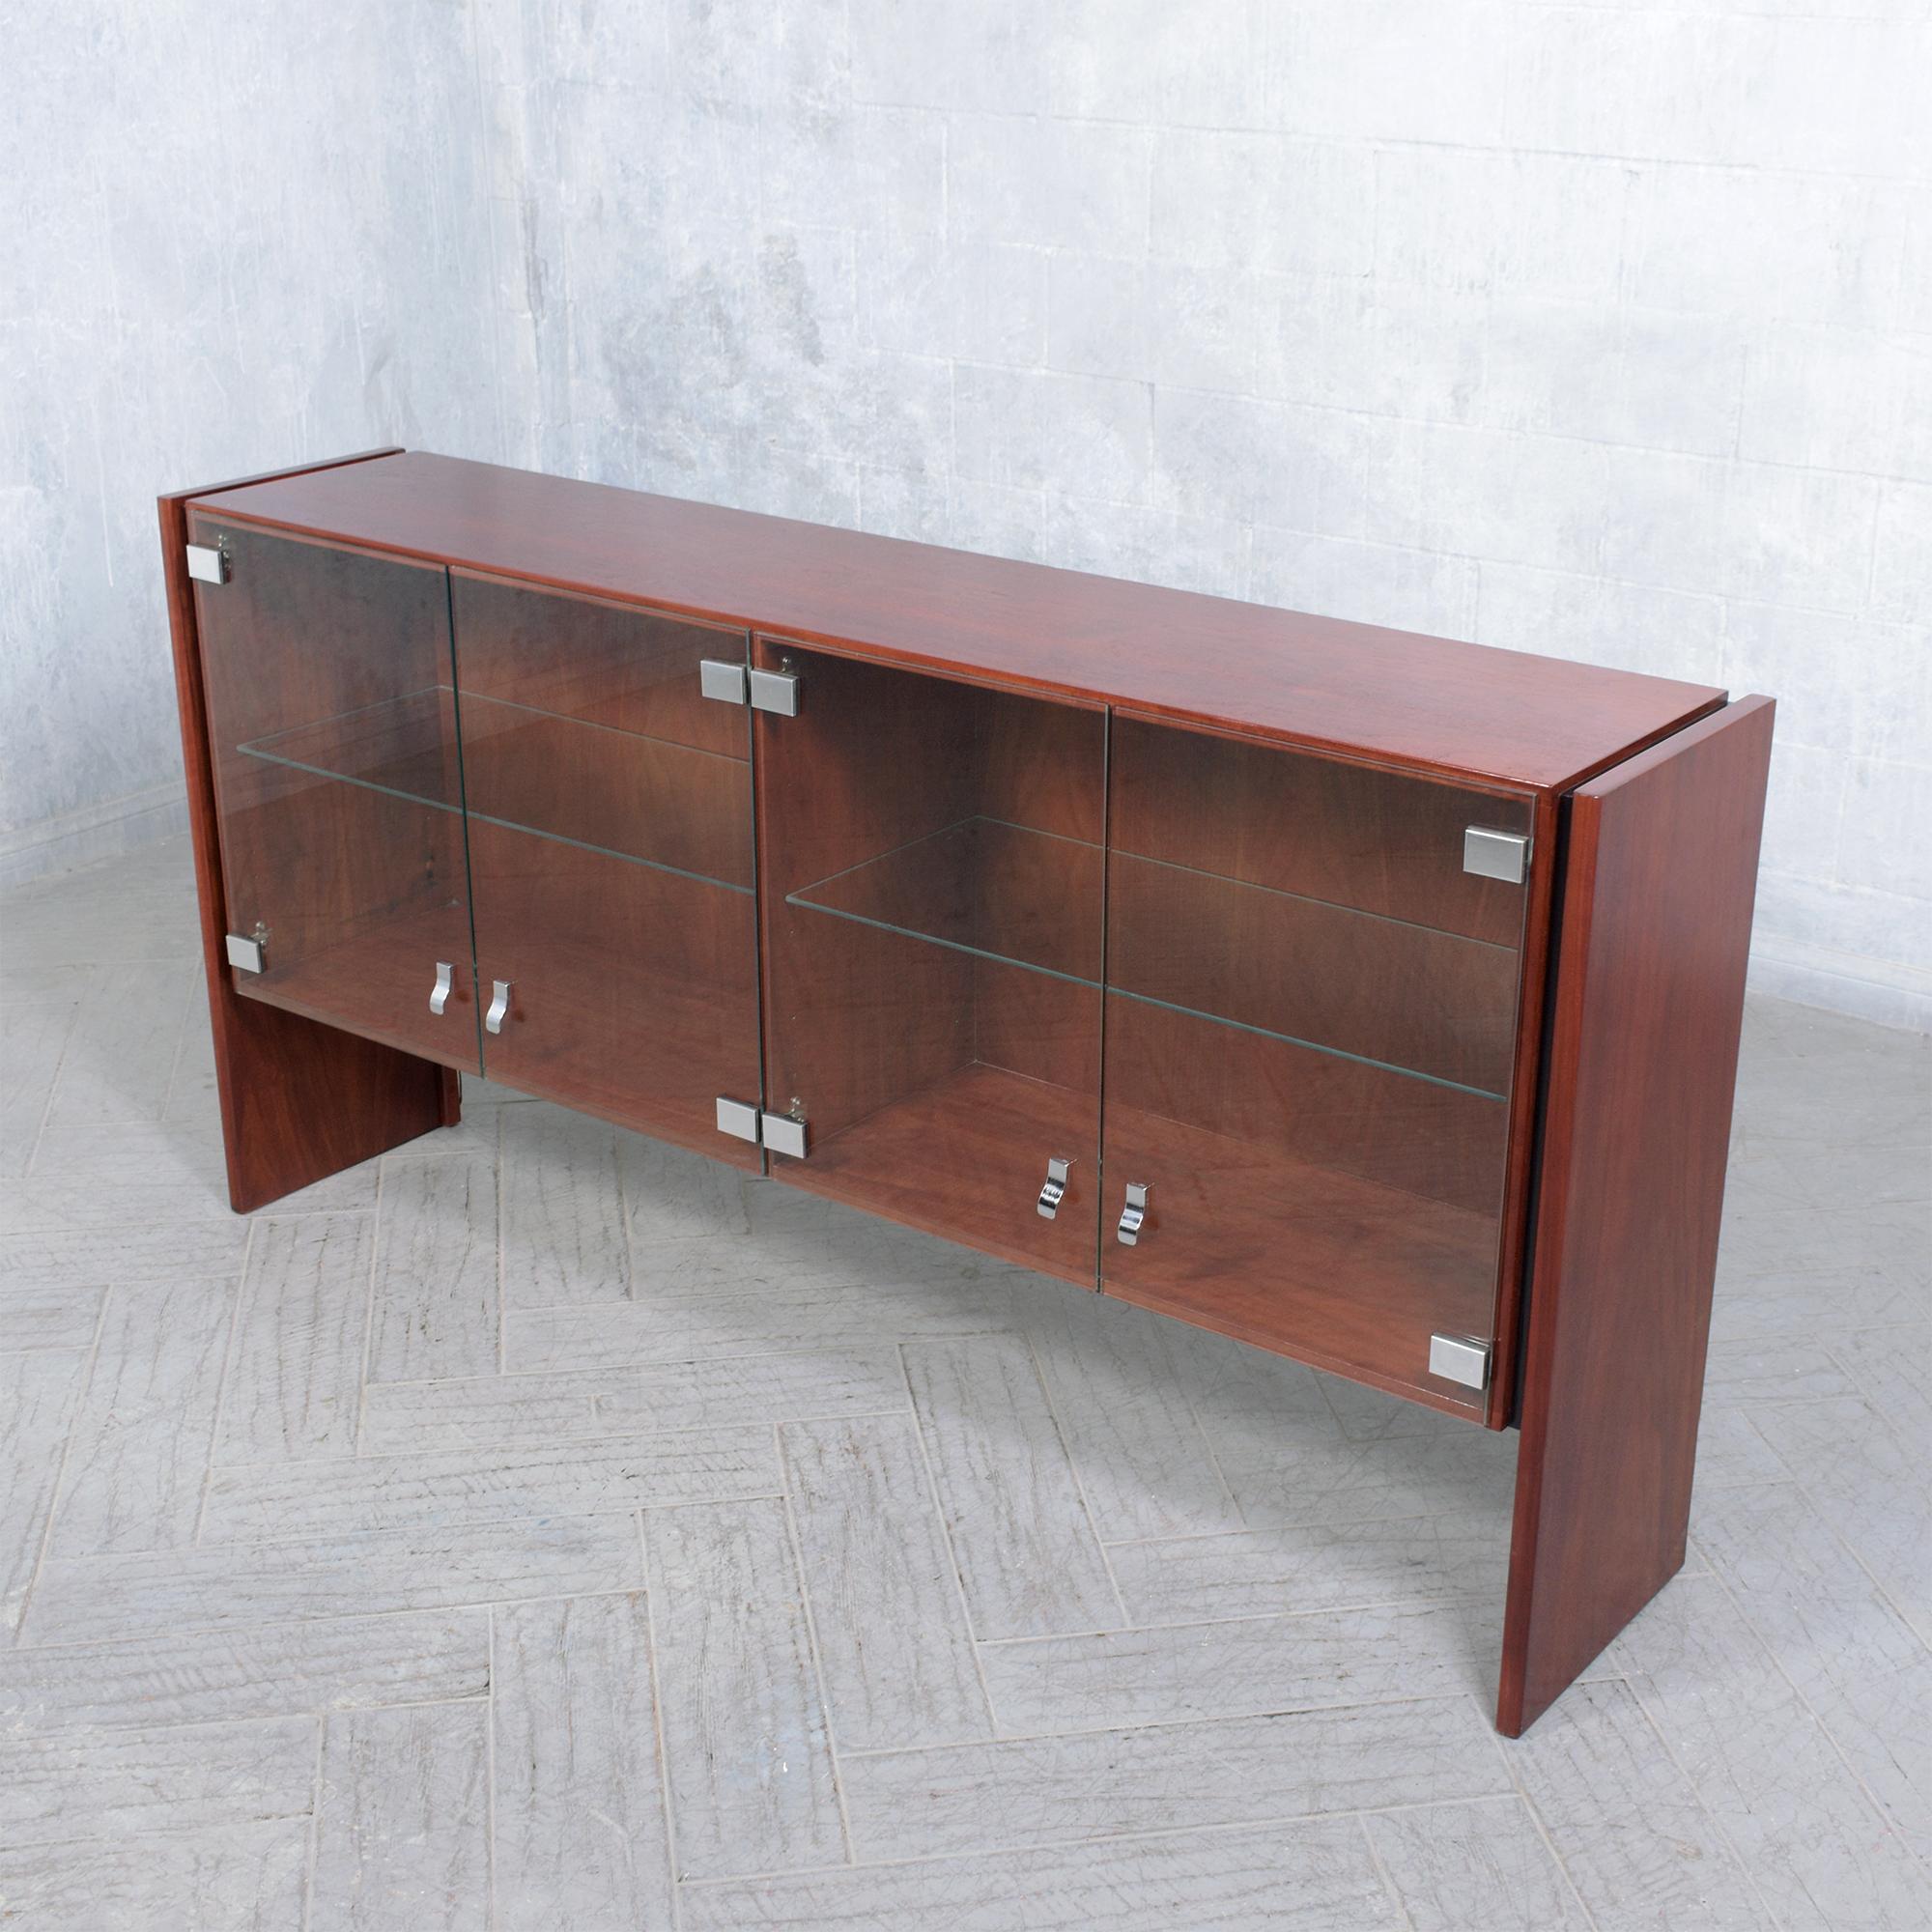 Restored 1960s Mahogany Cabinet: Mid-Century Elegance with Modern Flair For Sale 1